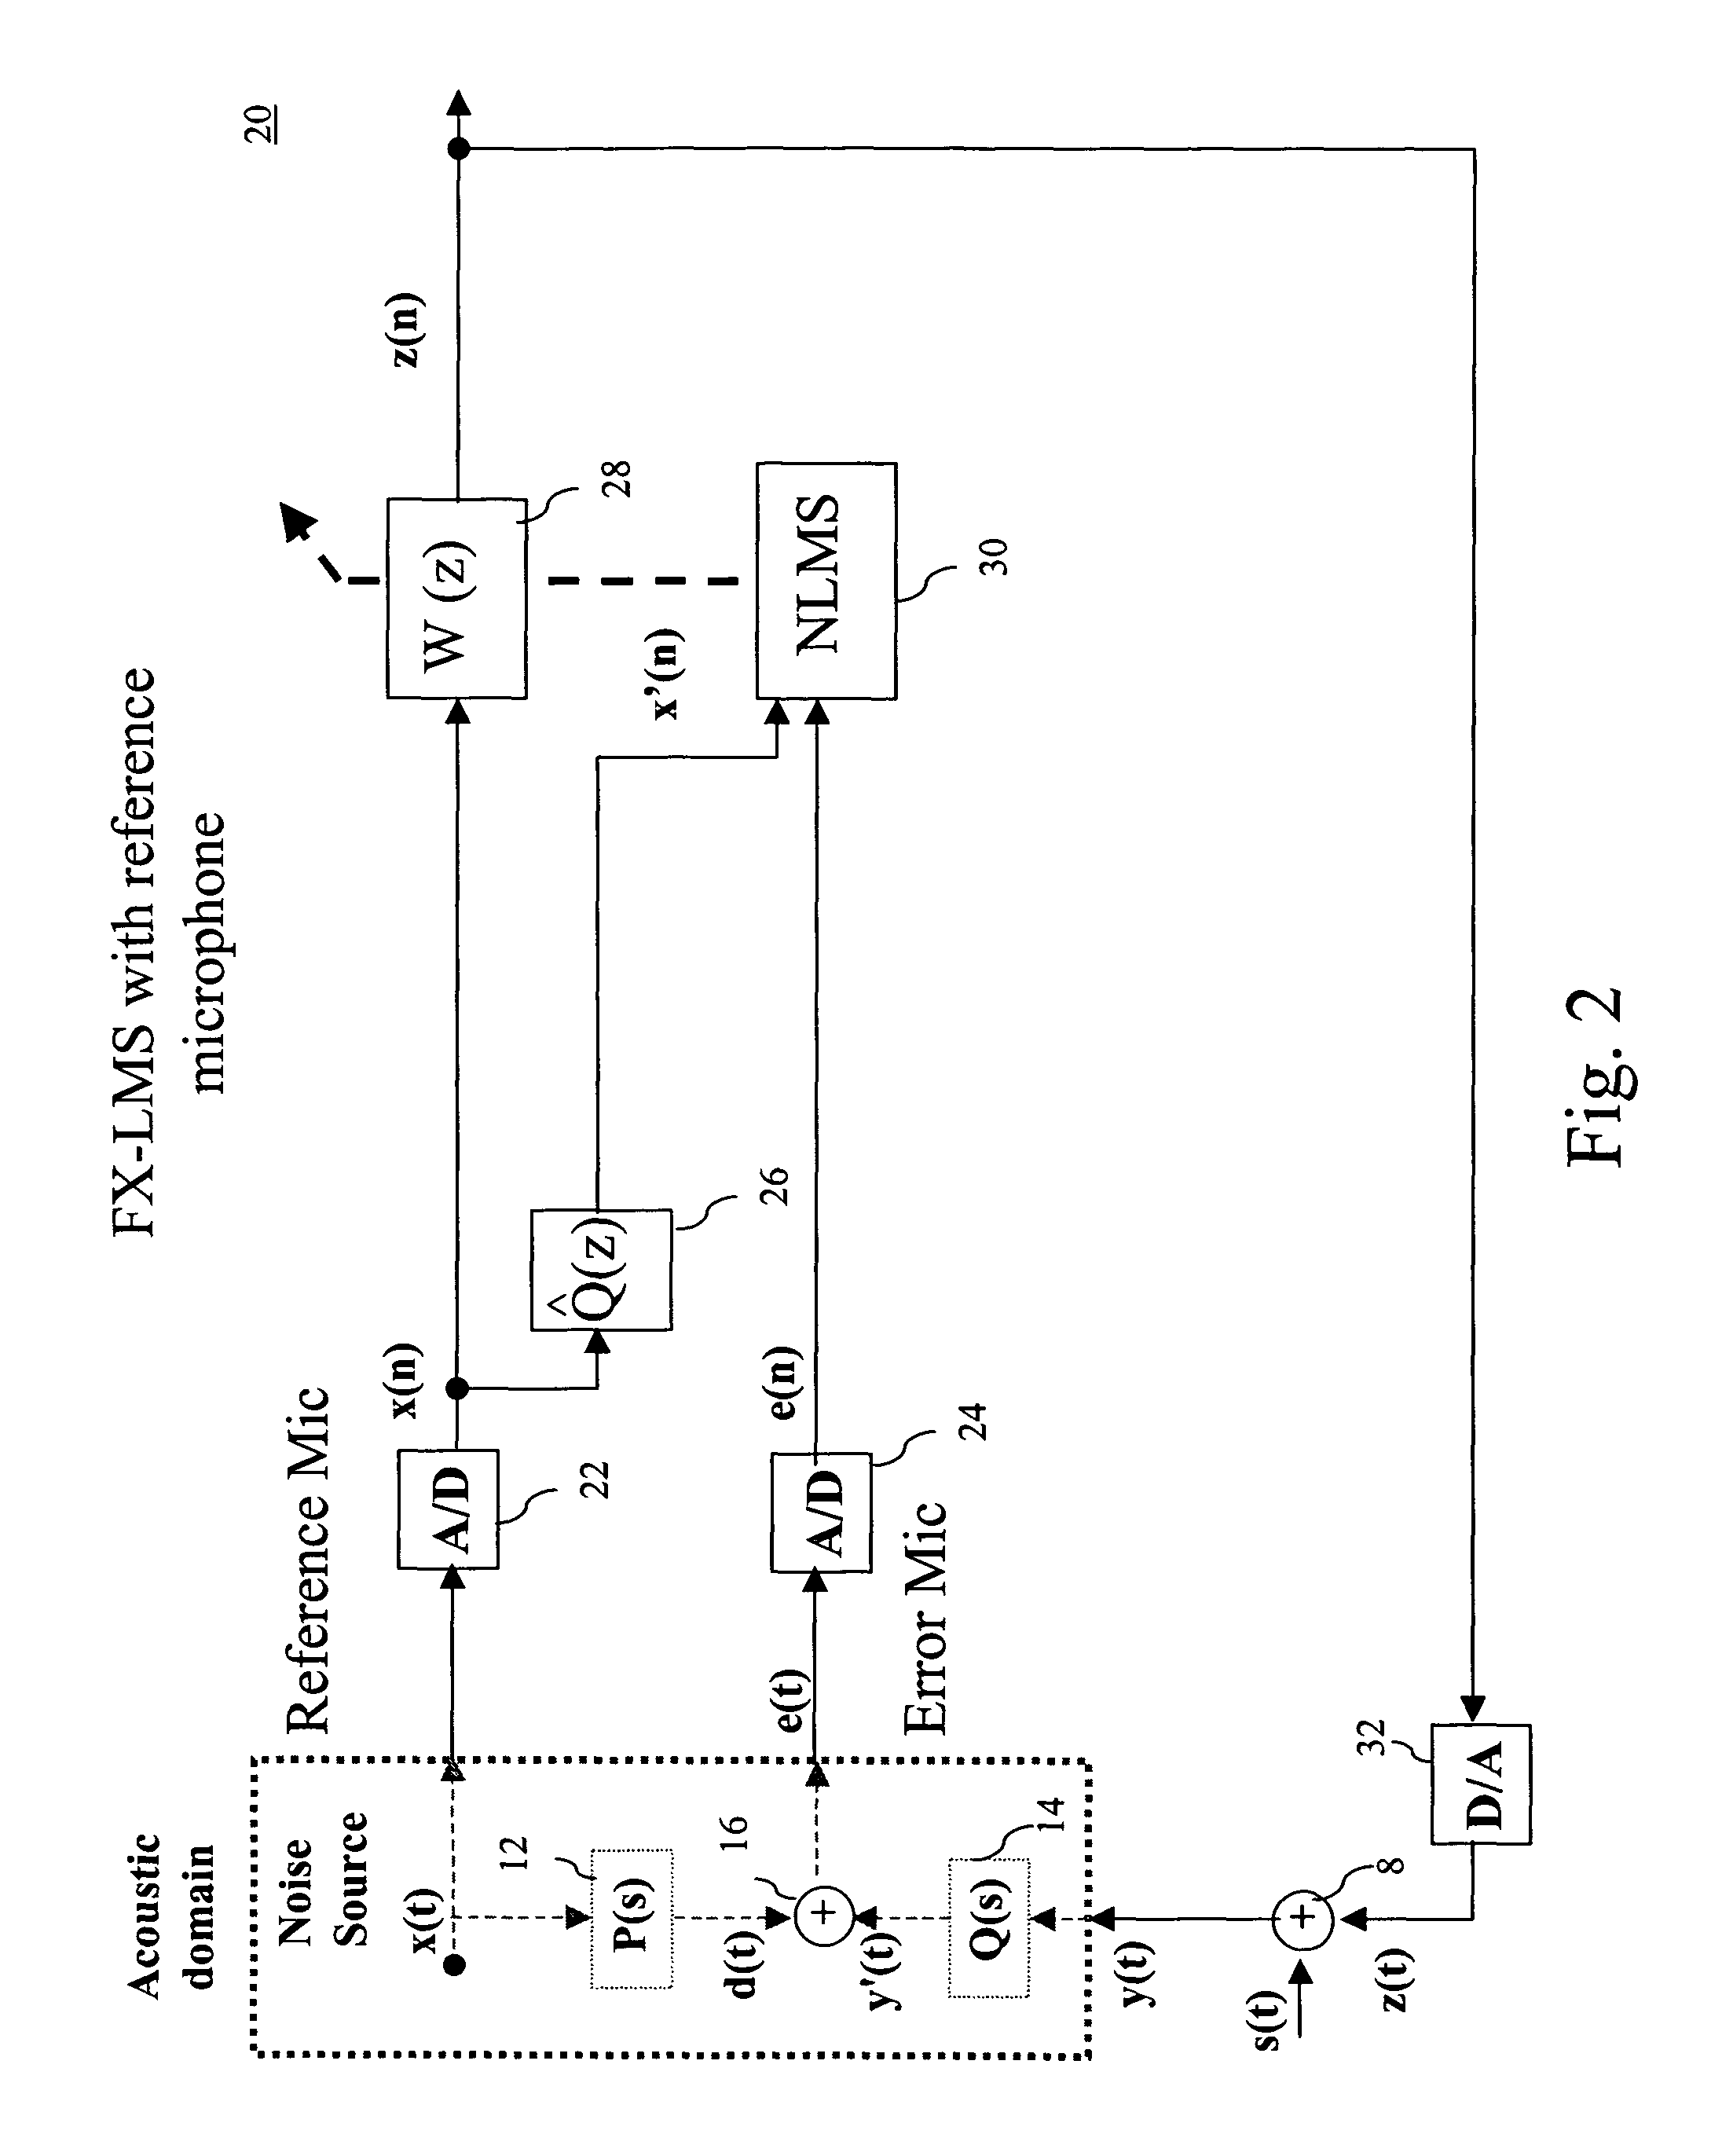 Method and system for active noise cancellation